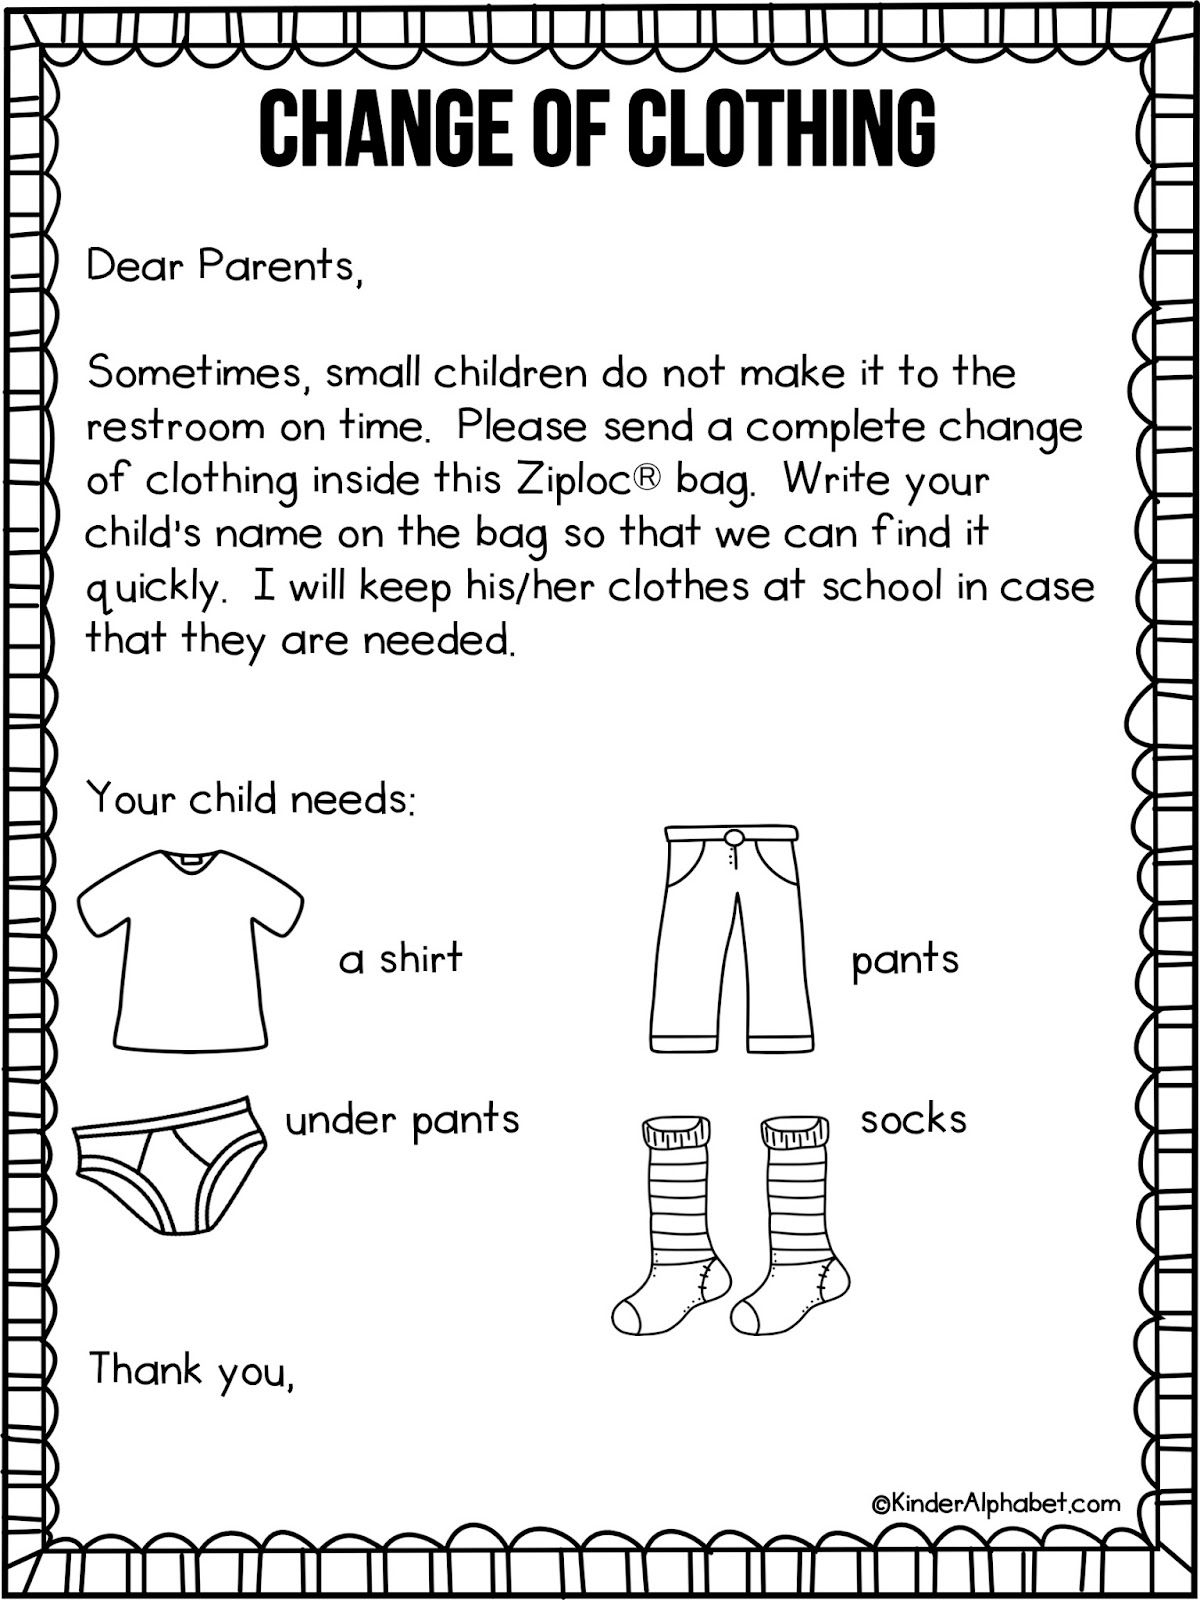 Preschool Welcome Letter to Parents From Teacher Template - Parent Letter for Change Of Clothing Free From Kinderalphabet Via